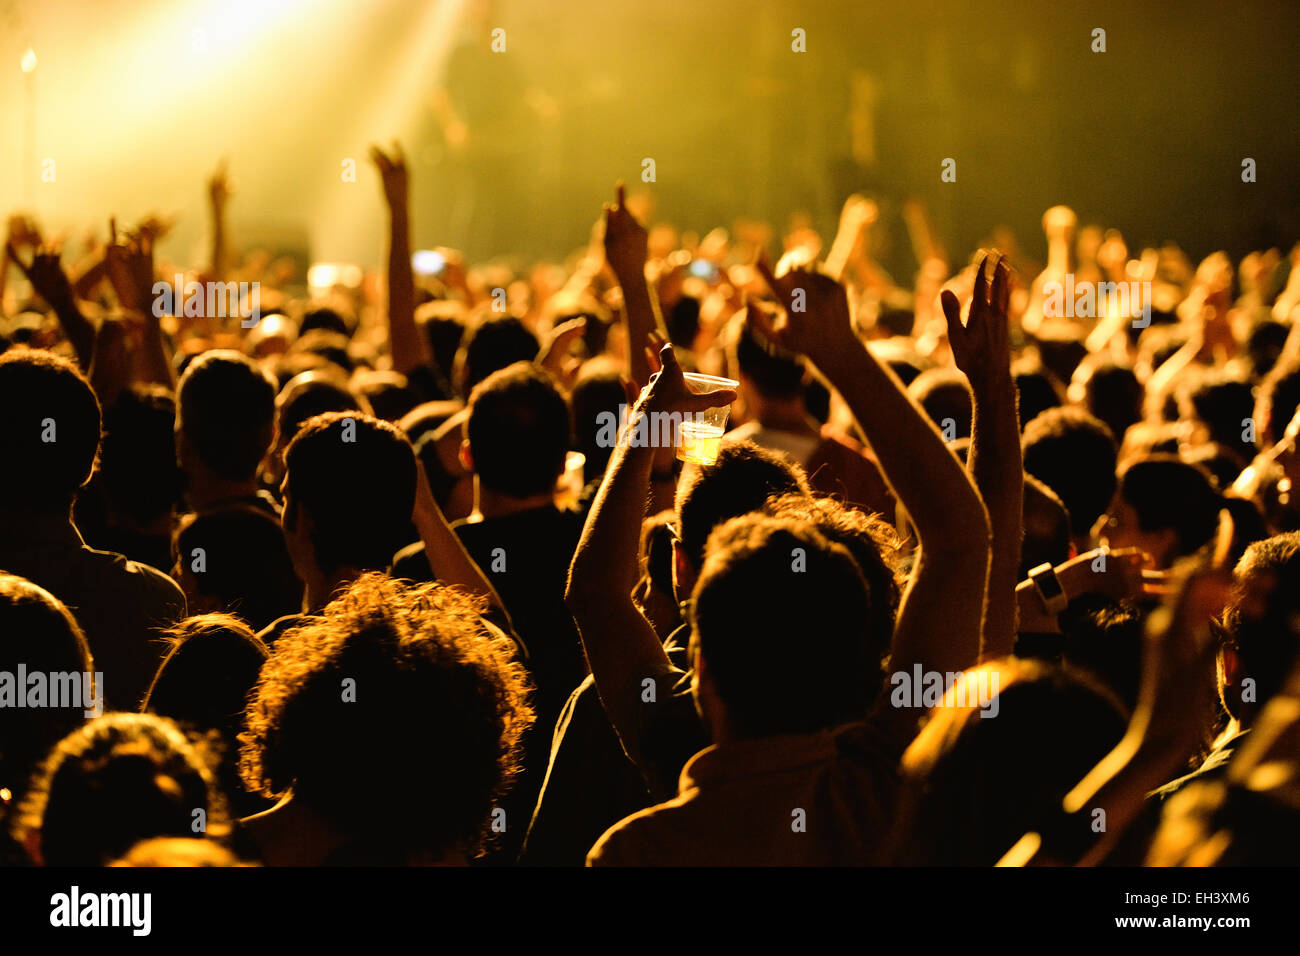 BARCELONA - MAY 16: Crowd in a concert at Razzmatazz stage on May 16, 2014 in Barcelona, Spain. Stock Photo